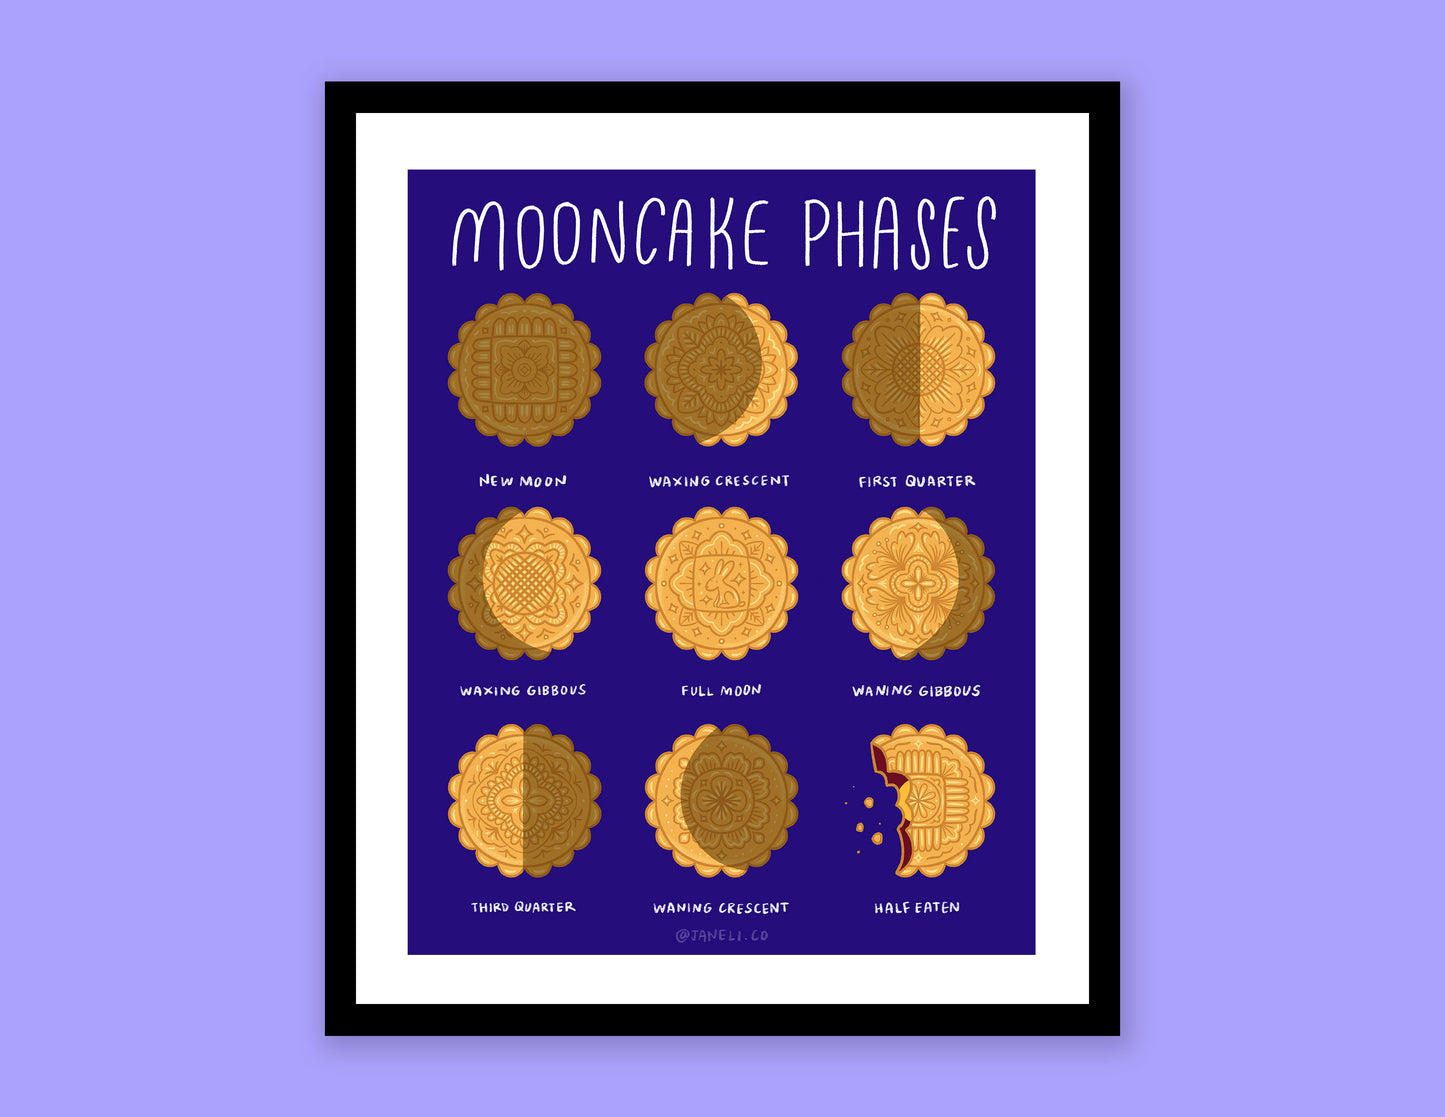 A digital mock of a framed JaneLi.Co print that says "Mooncake Phases" with 9 different illustrations of mooncakes in the different moon cycle phases over a purple background.